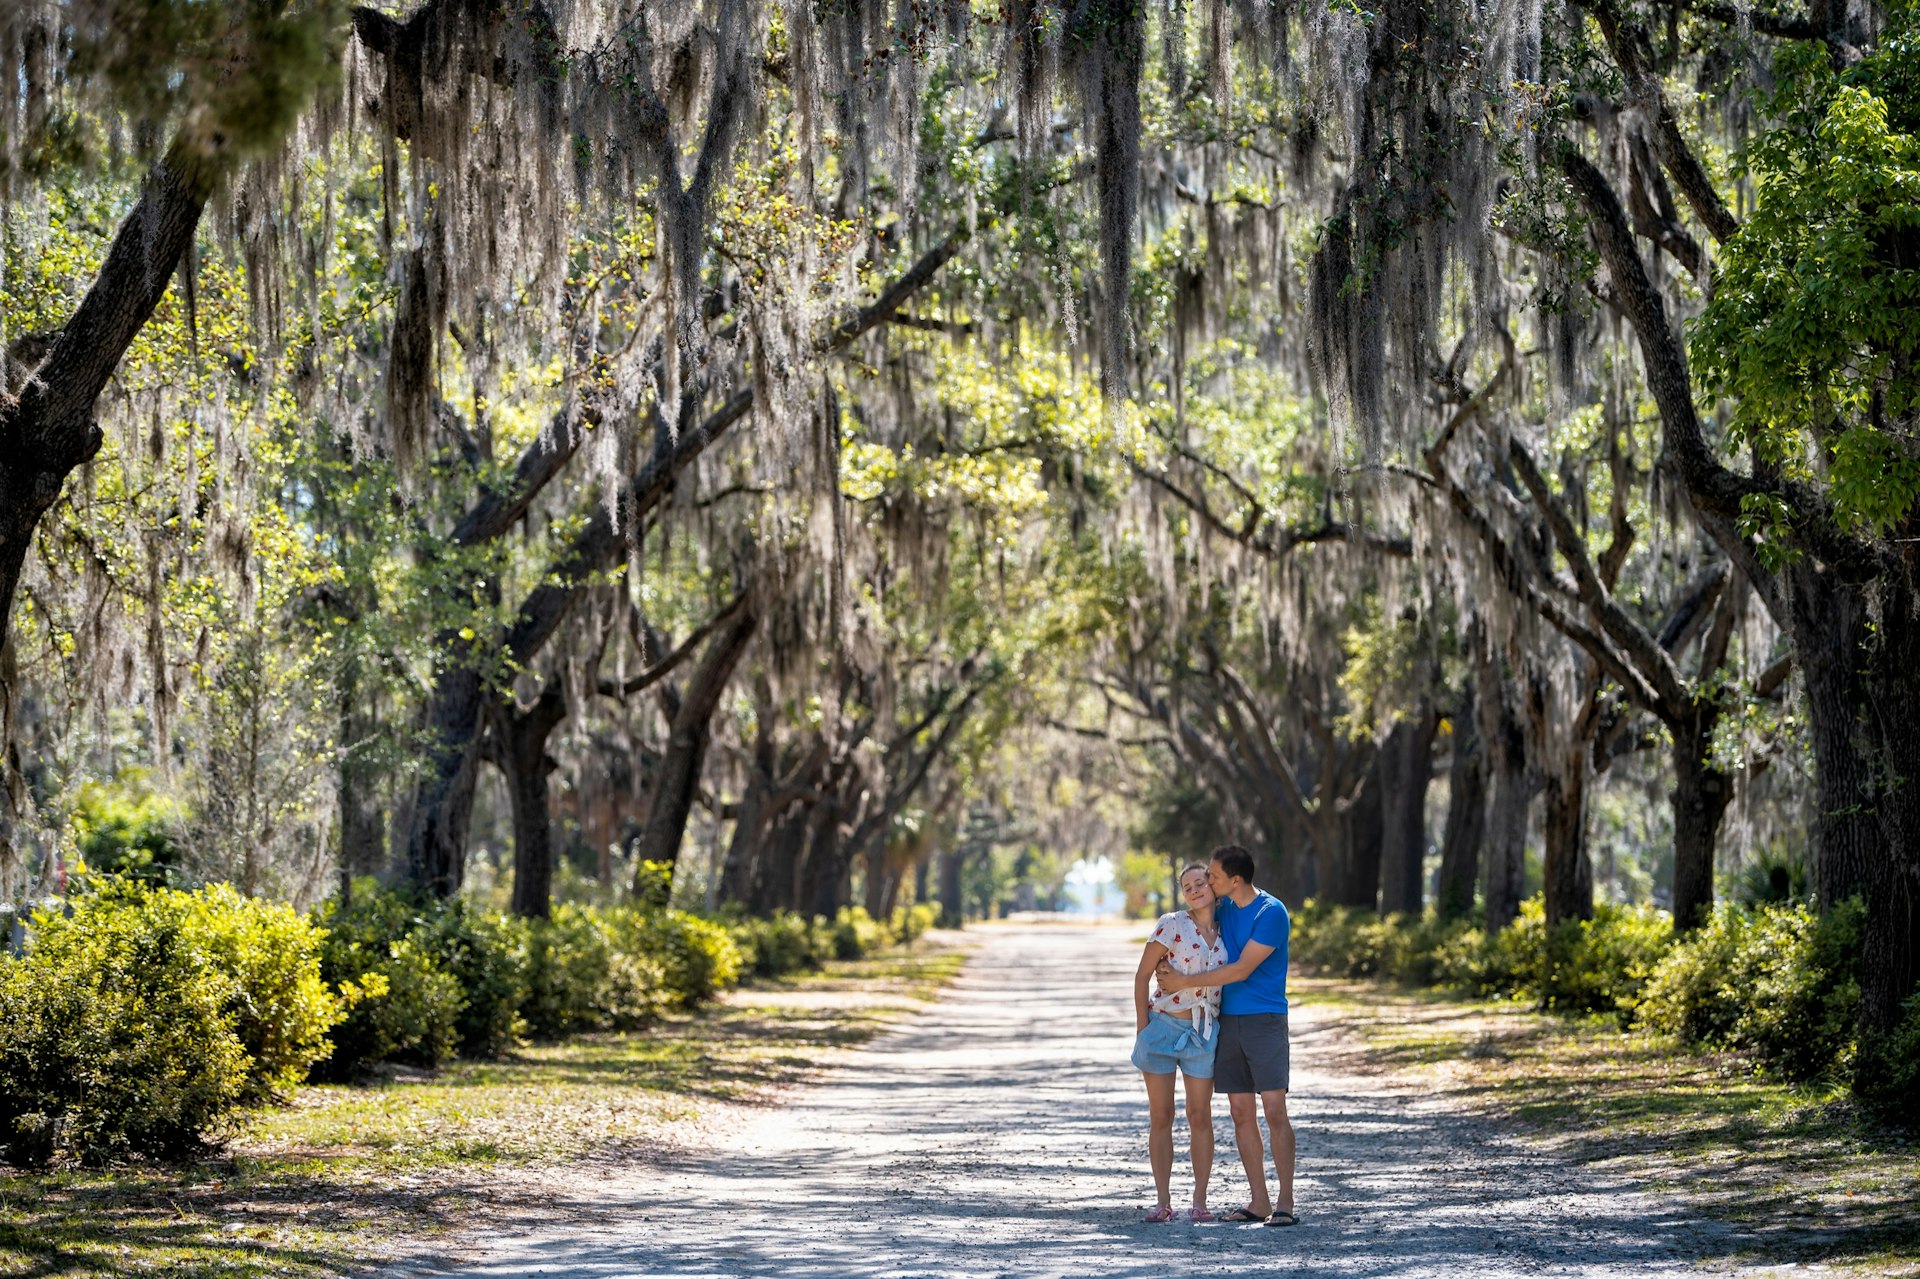 A man kisses a woman's kiss on a path flanked with Spanish moss trees in Savannah, Georgia, South, USA